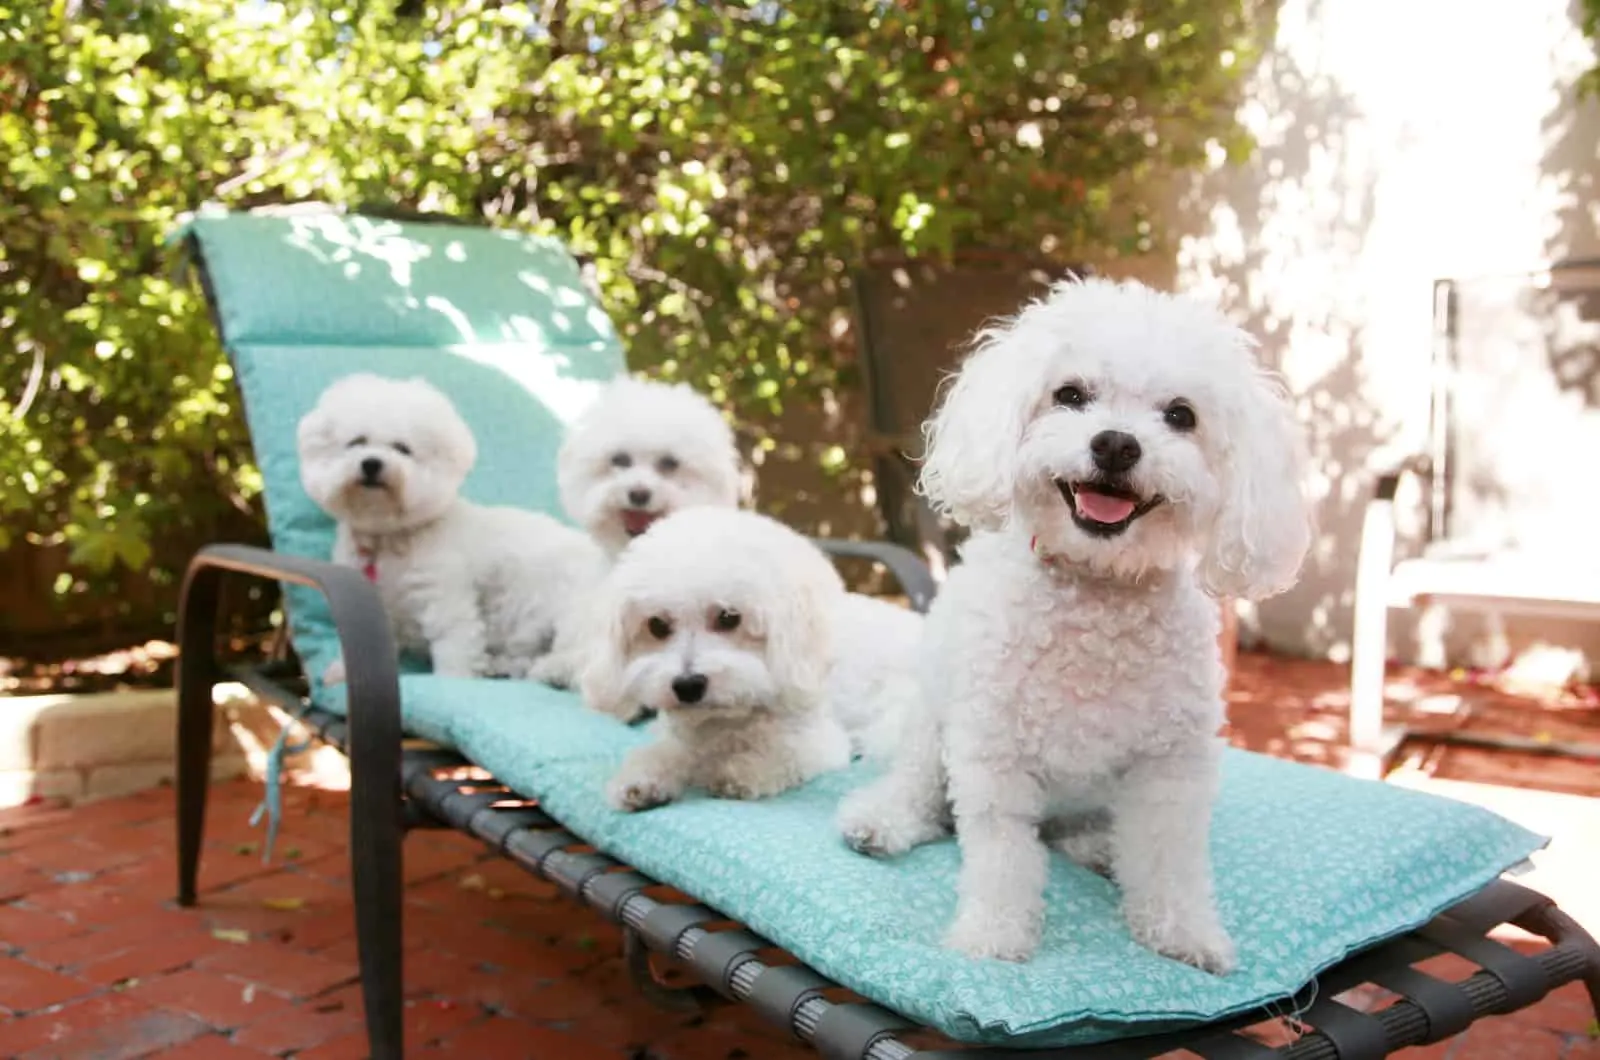 bichon frise dogs resting on a chair